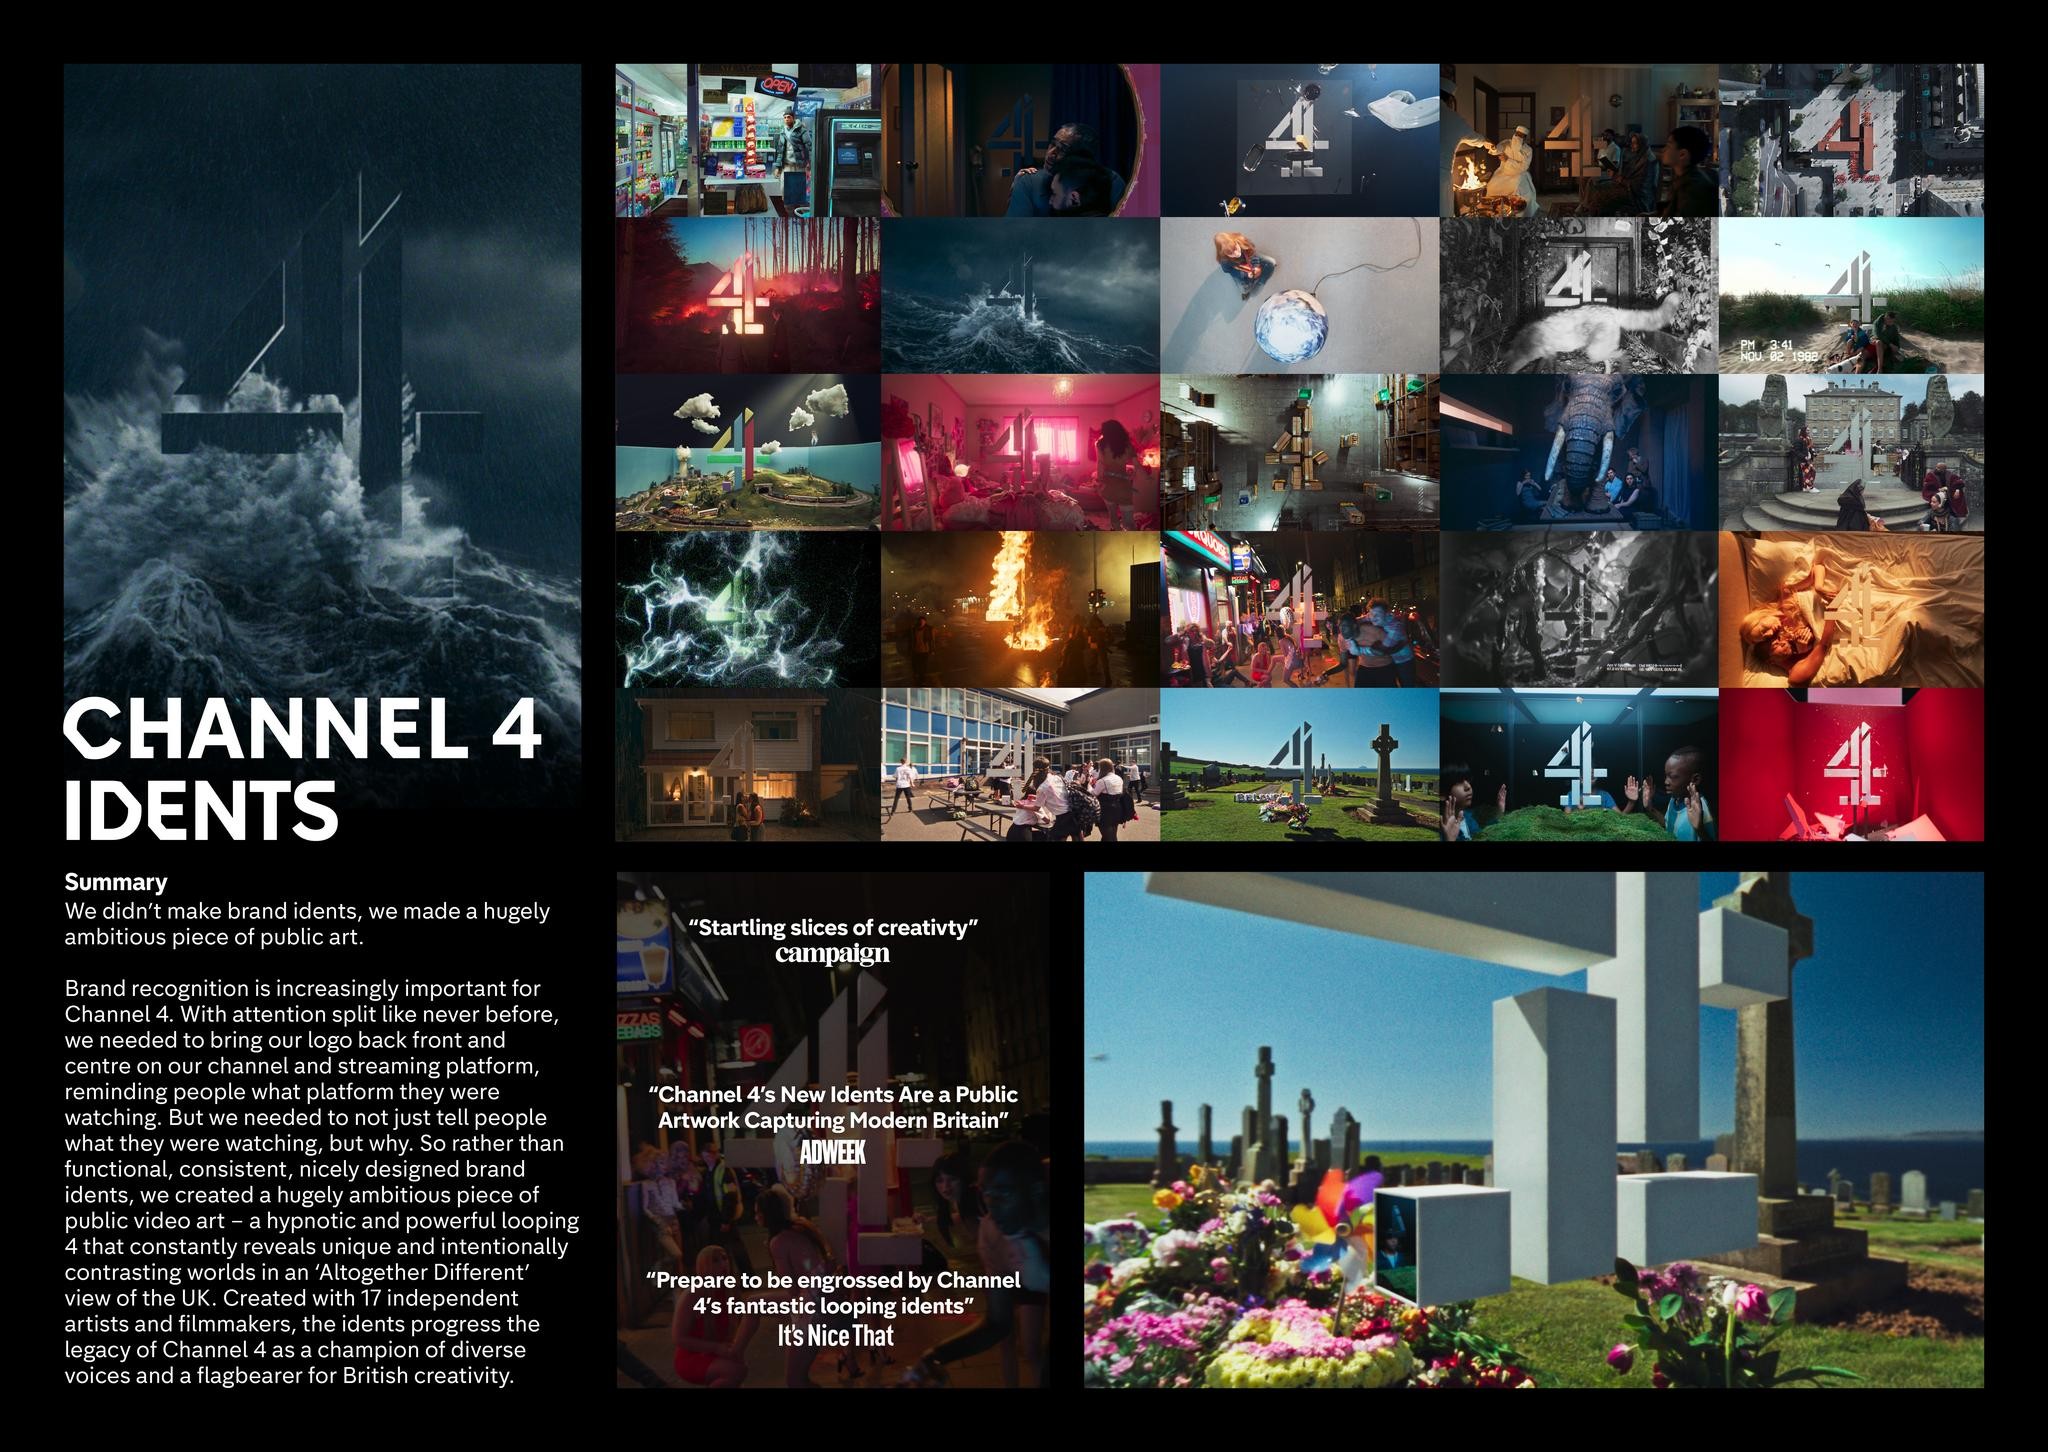 CHANNEL 4 IDENTS